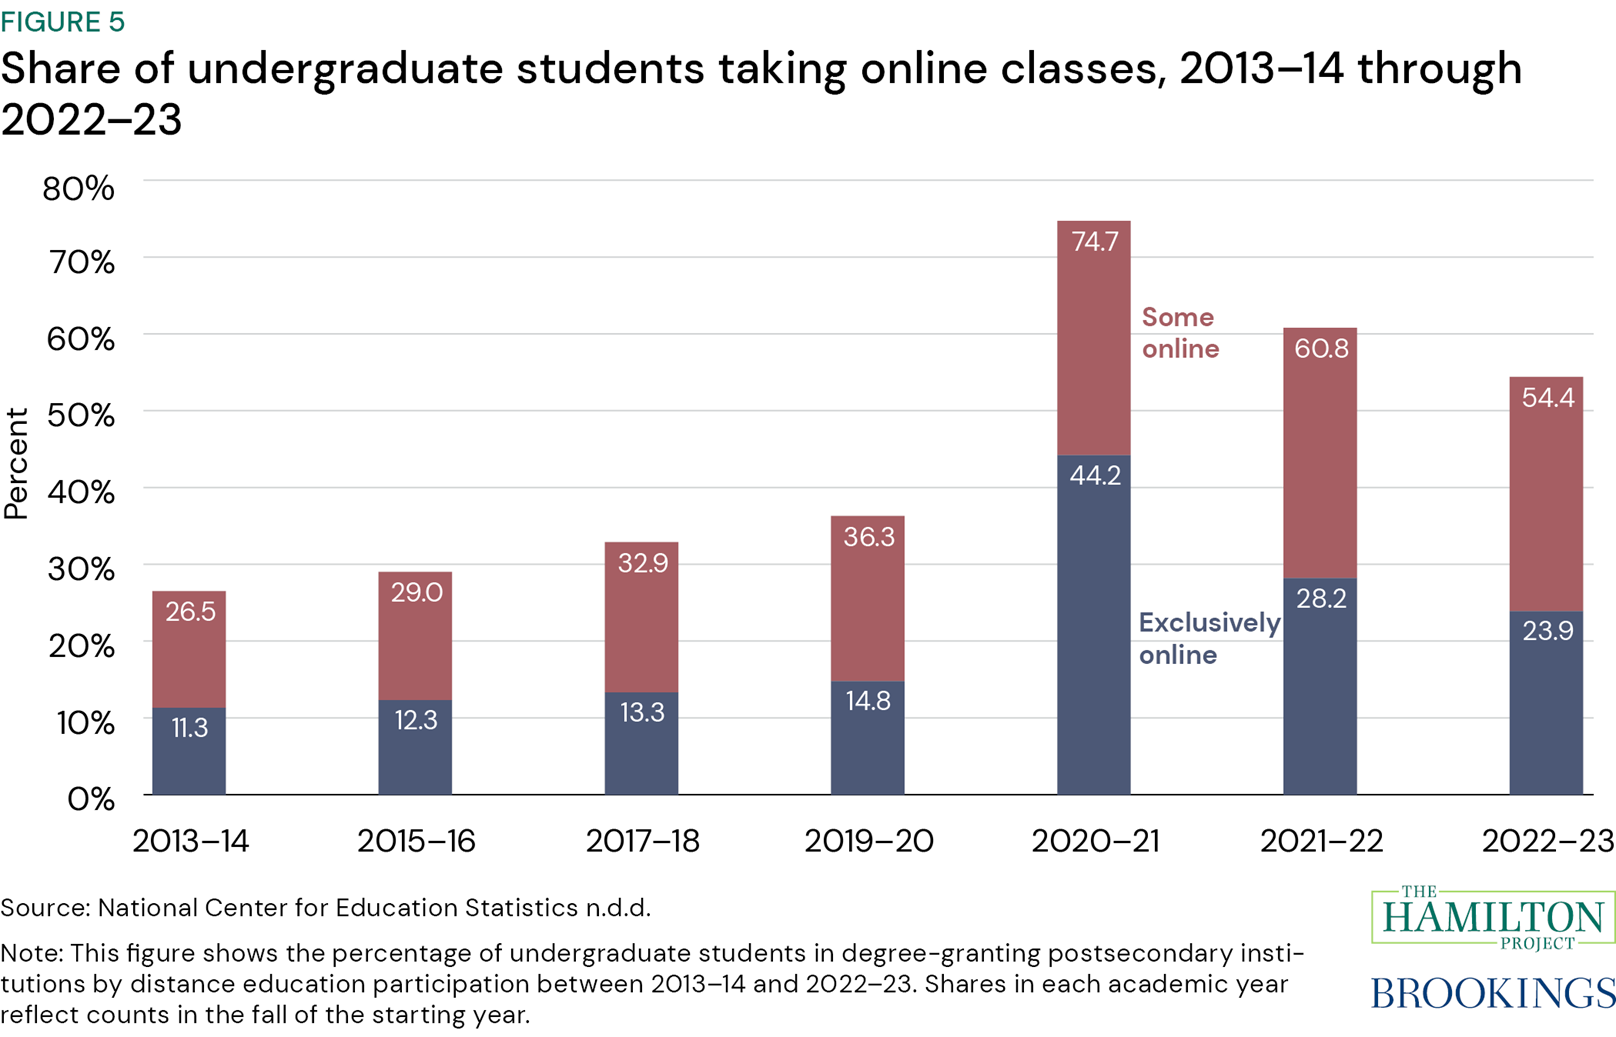 Figure 5: Share of undergraduate students taking online classes, 2013-14 through 2022-23